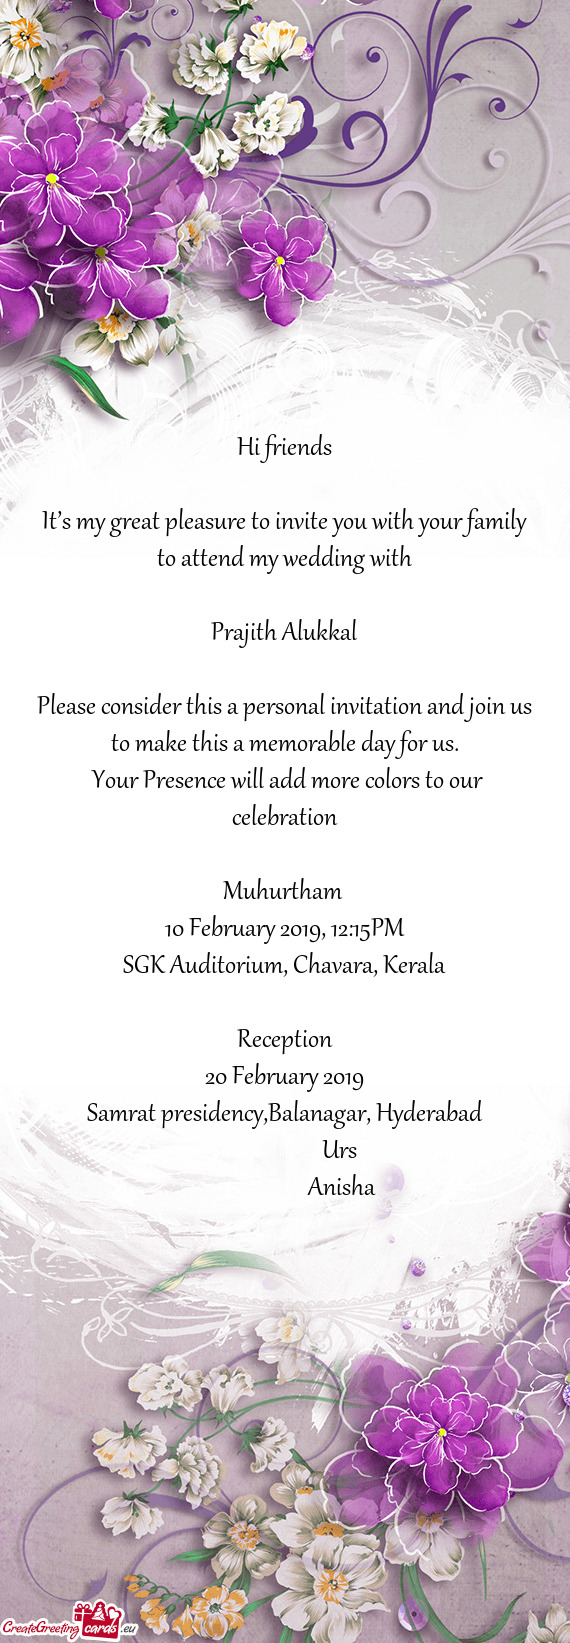 Please consider this a personal invitation and join us to make this a memorable day for us